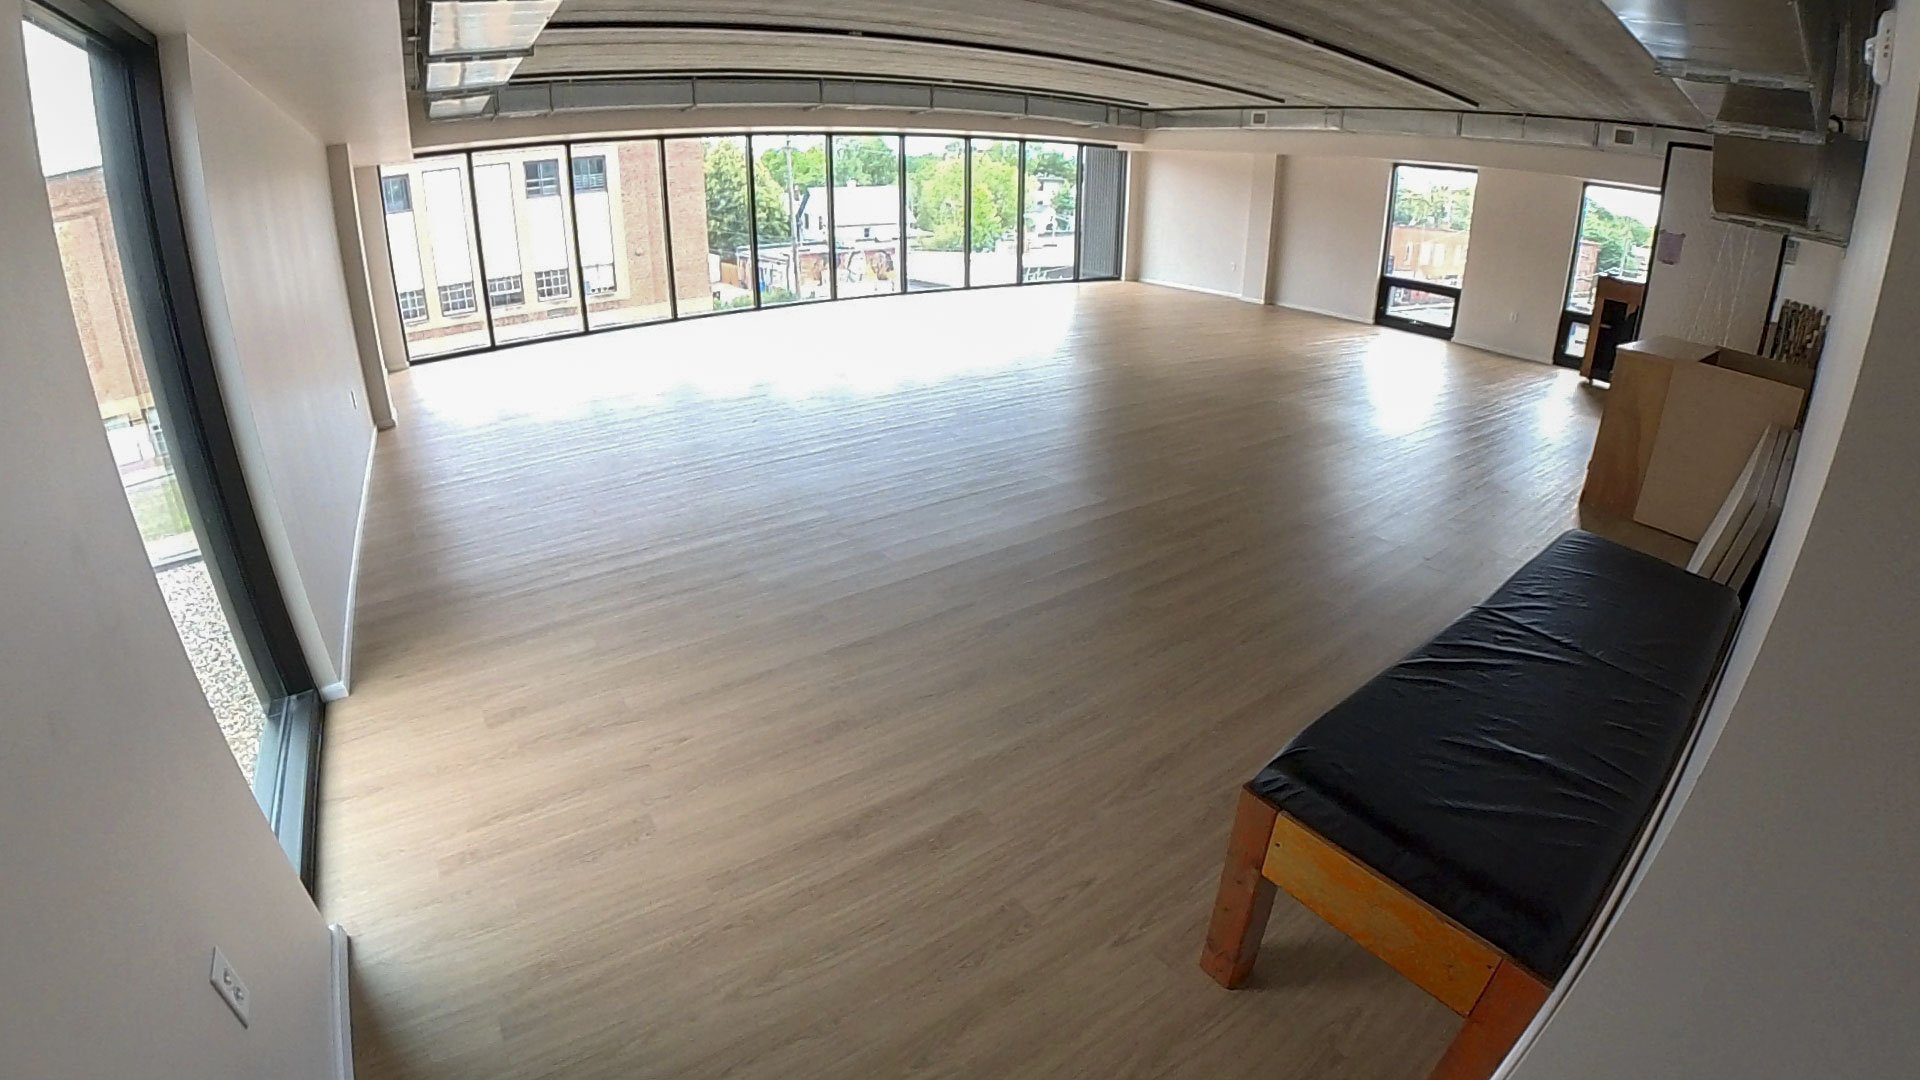 A wide angle view of a wooden floored dance studio with floor to ceiling windows along one wall.